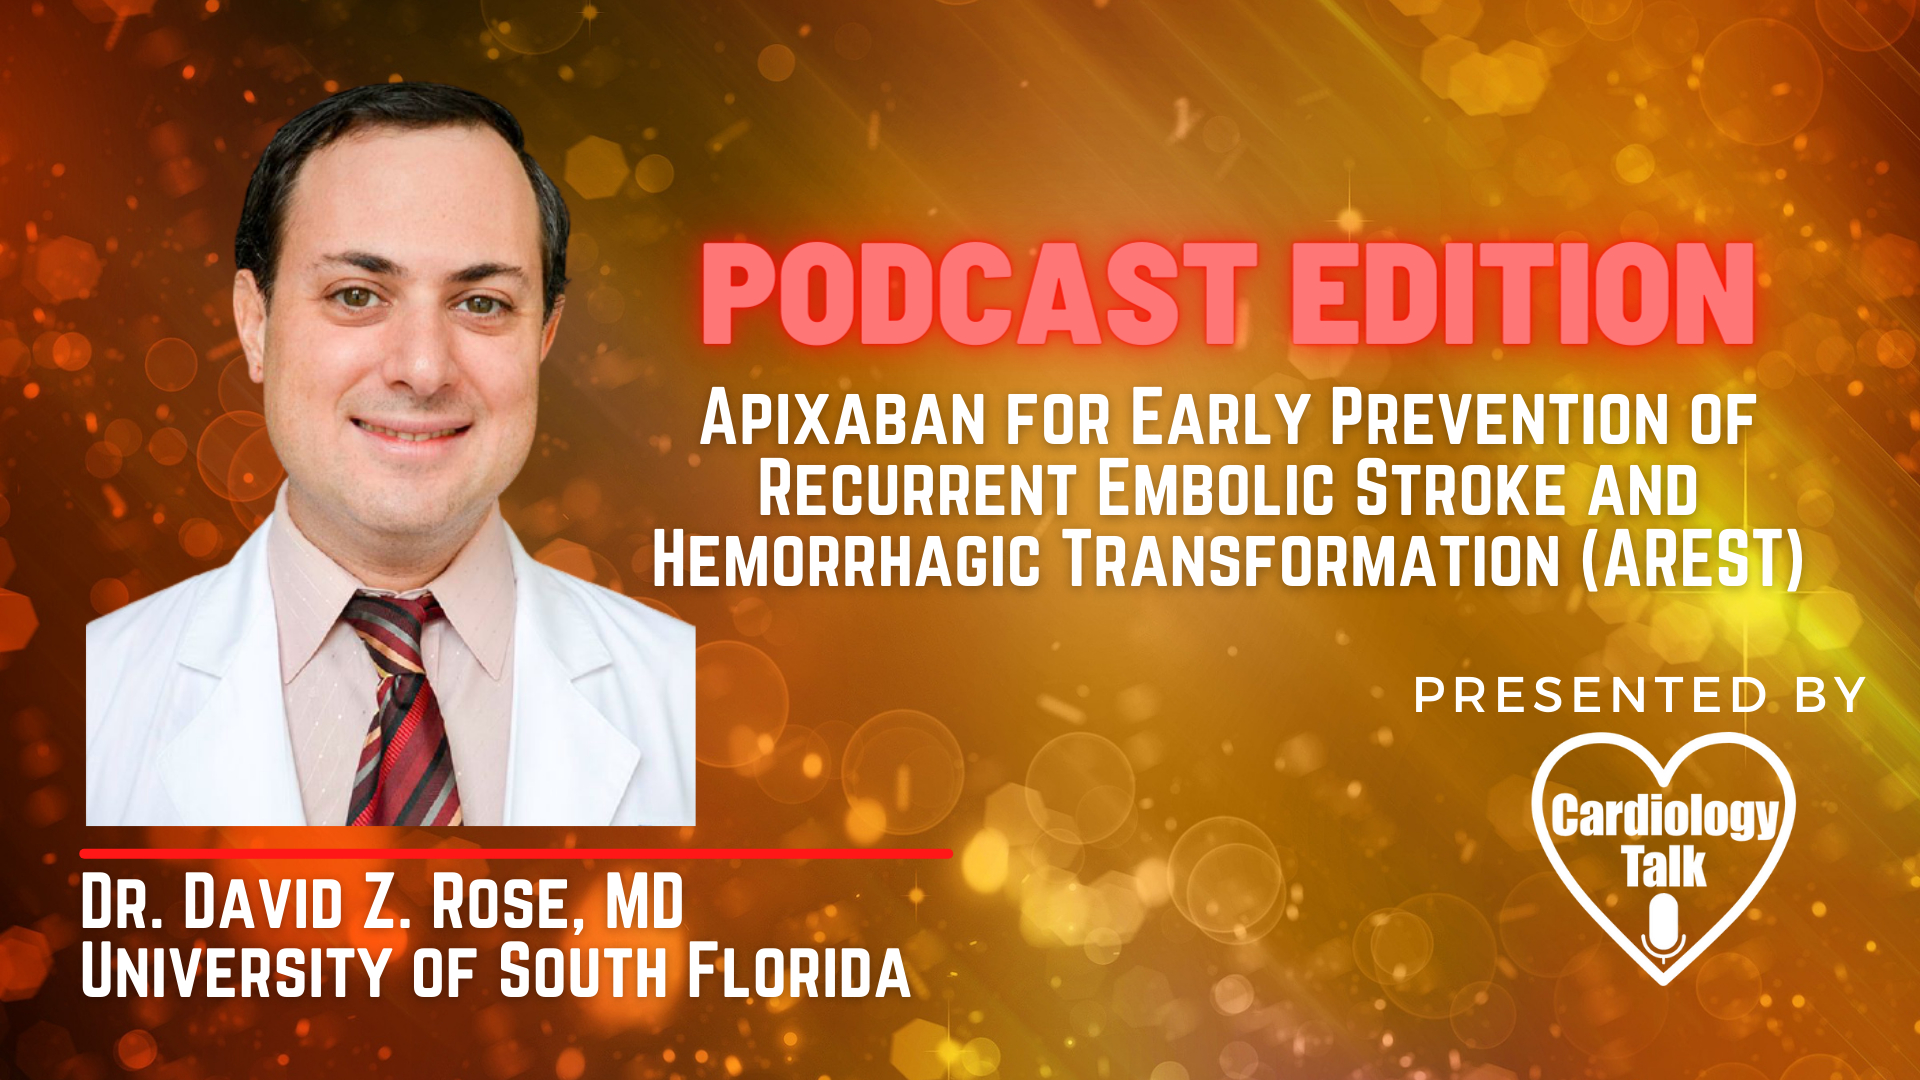 Podcast- Dr. David Z. Rose, MD - Apixaban for Early Prevention of Recurrent Embolic Stroke and Hemorrhagic Transformation (AREST)